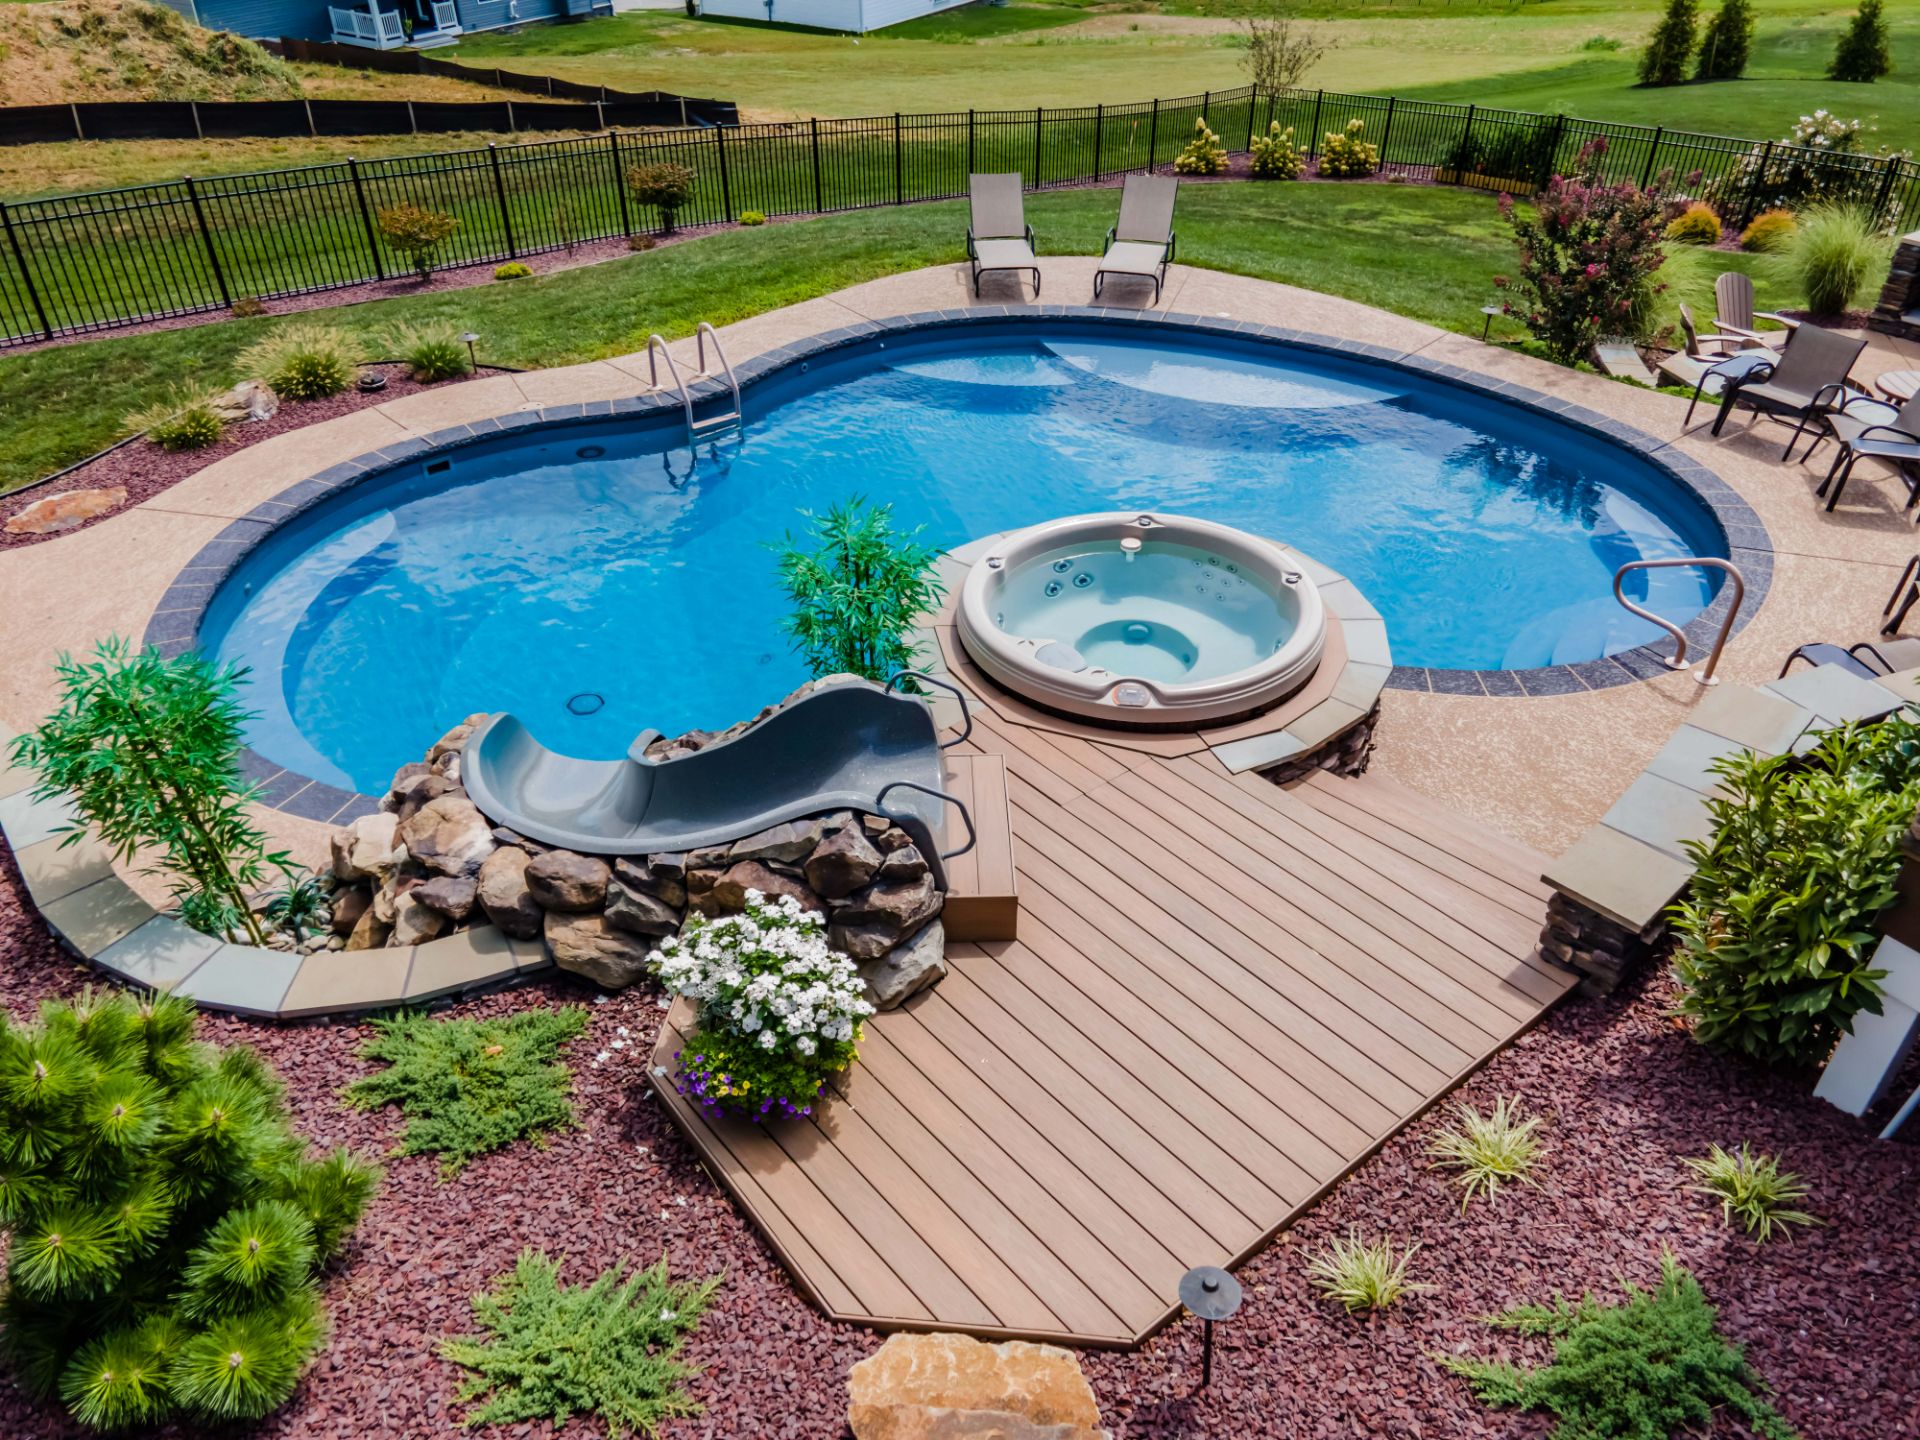 Is a Vinyl Liner Pool Right for My Growing Family?